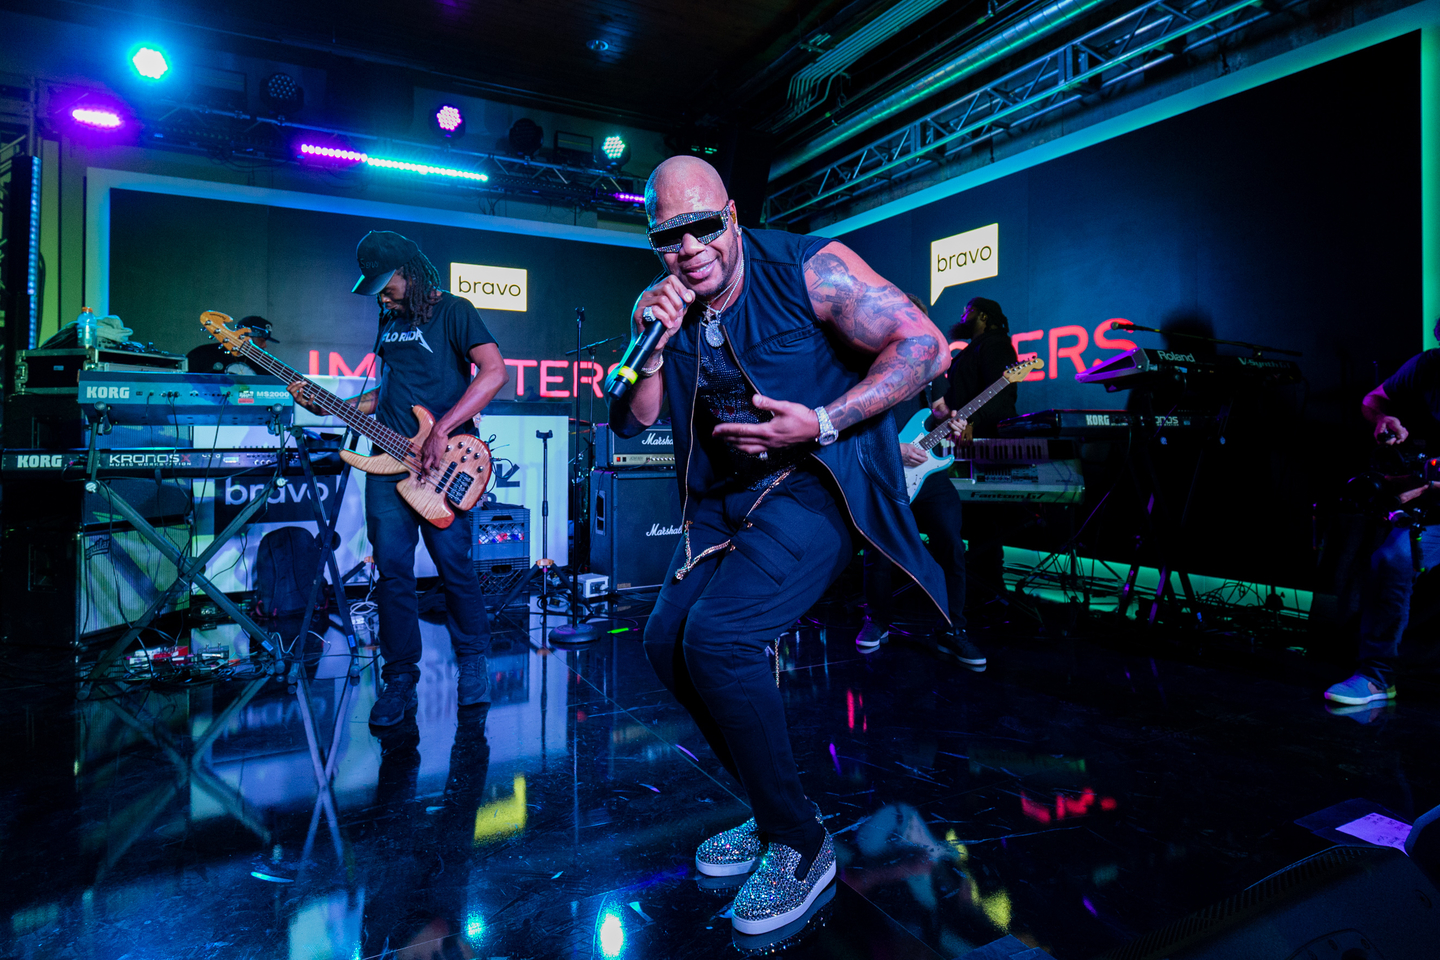 Flo-Rida performed at the “Cocktails & Cons by Bravo’s Imposters” party. Photo by Waytao Shing